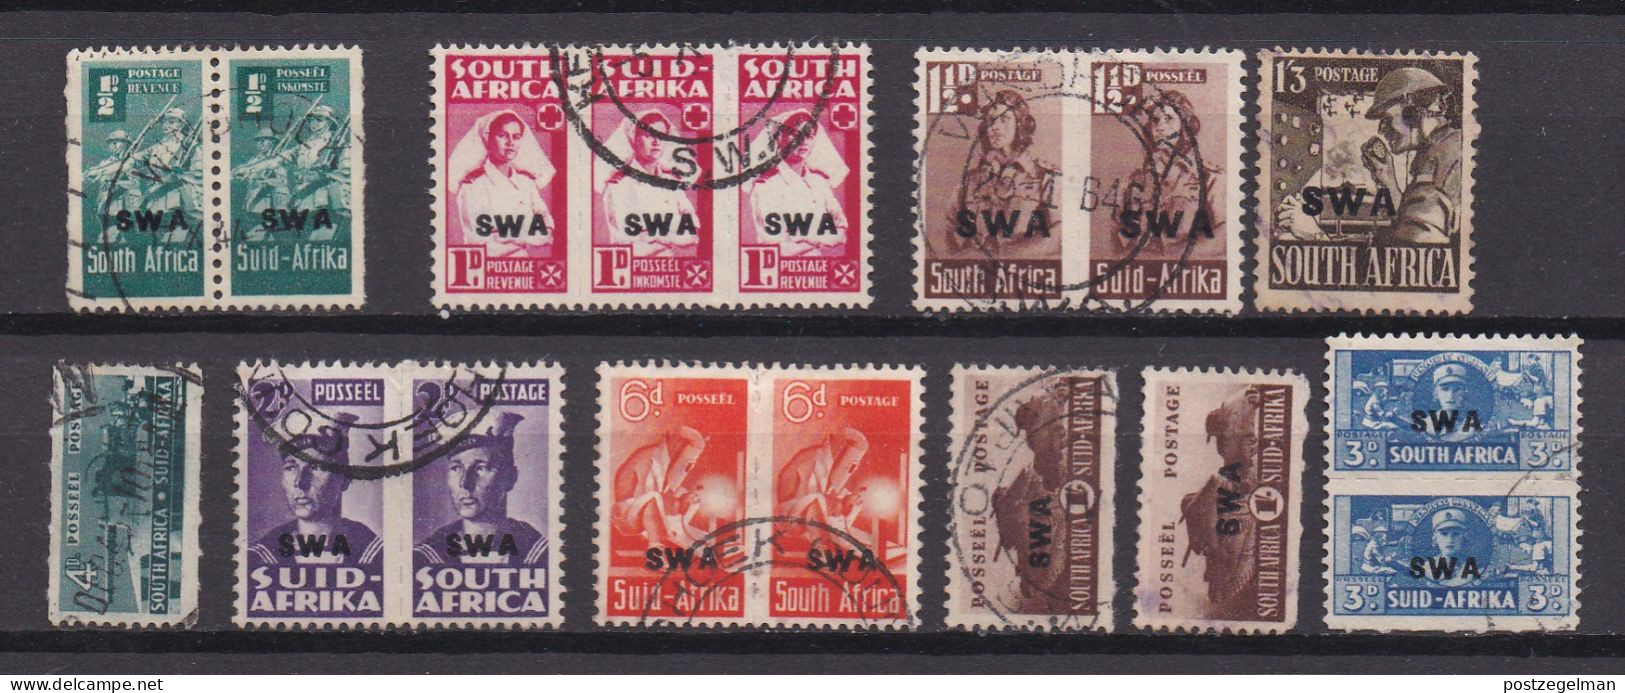 SOUTH WEST AFRICA 1942 Used Stamps 230-245 War Effort Reduced Sizes (not Complete) - South West Africa (1923-1990)